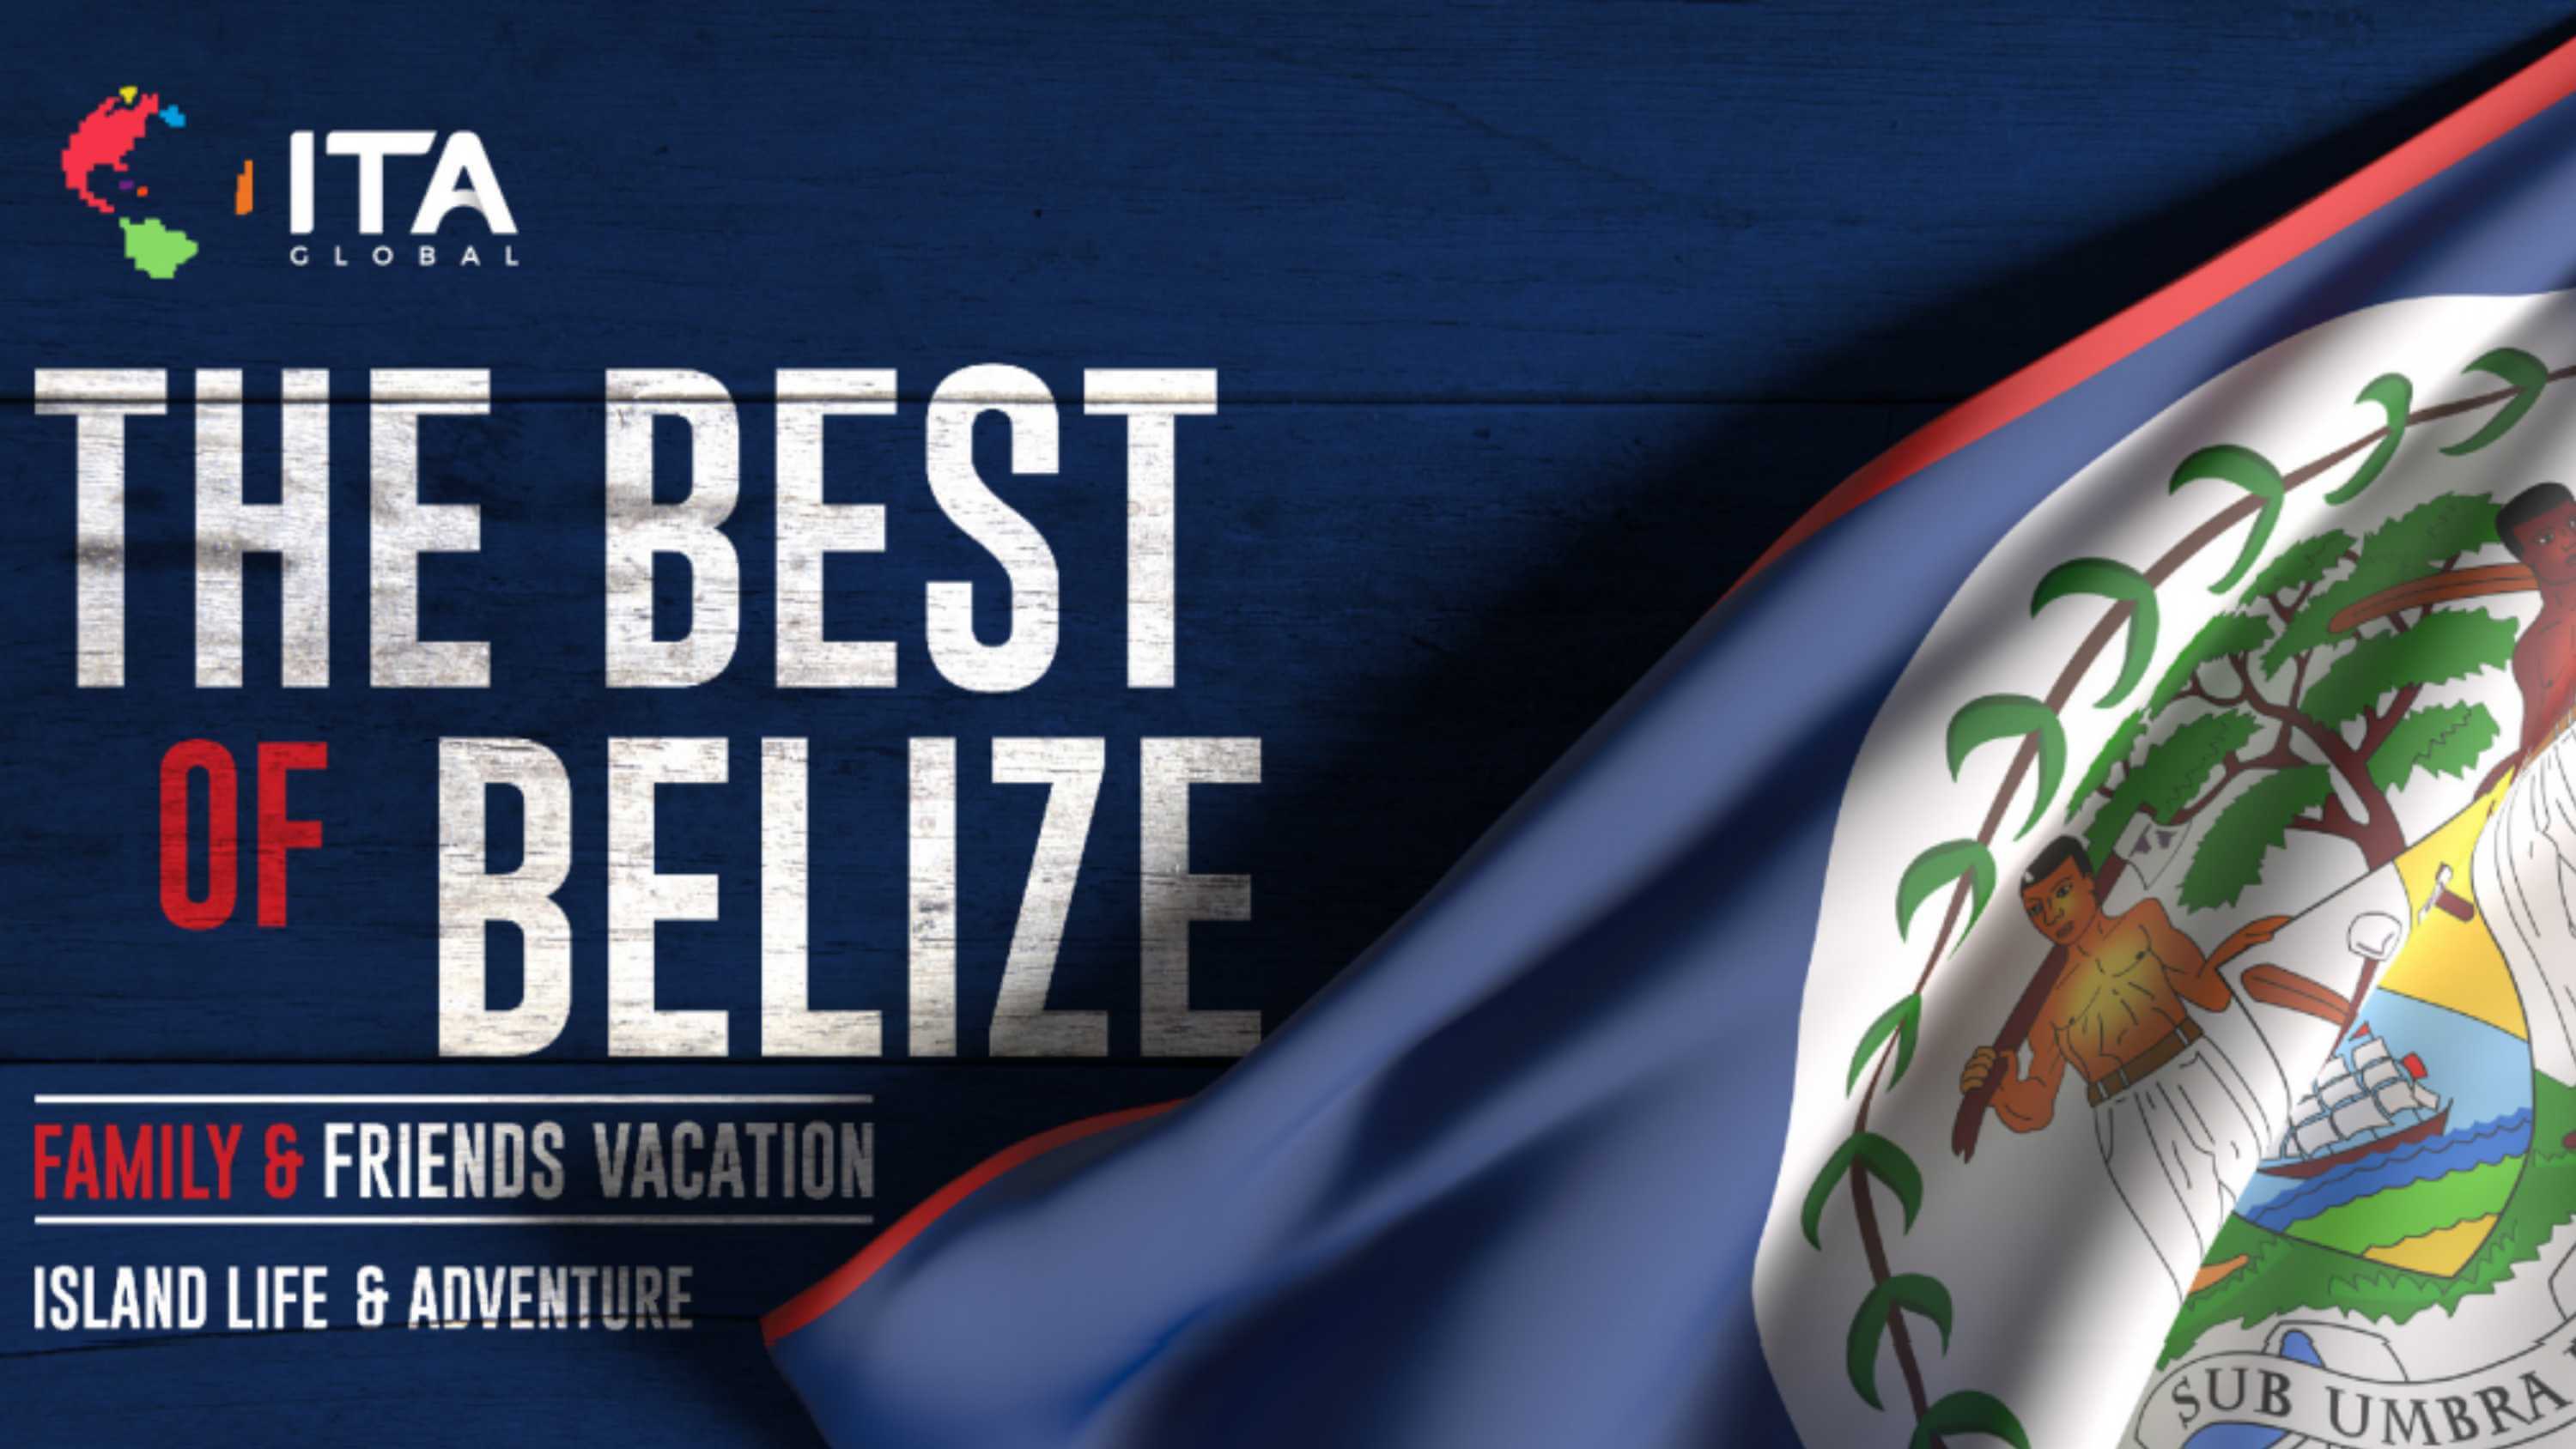 Belize Family & Friends Vacation